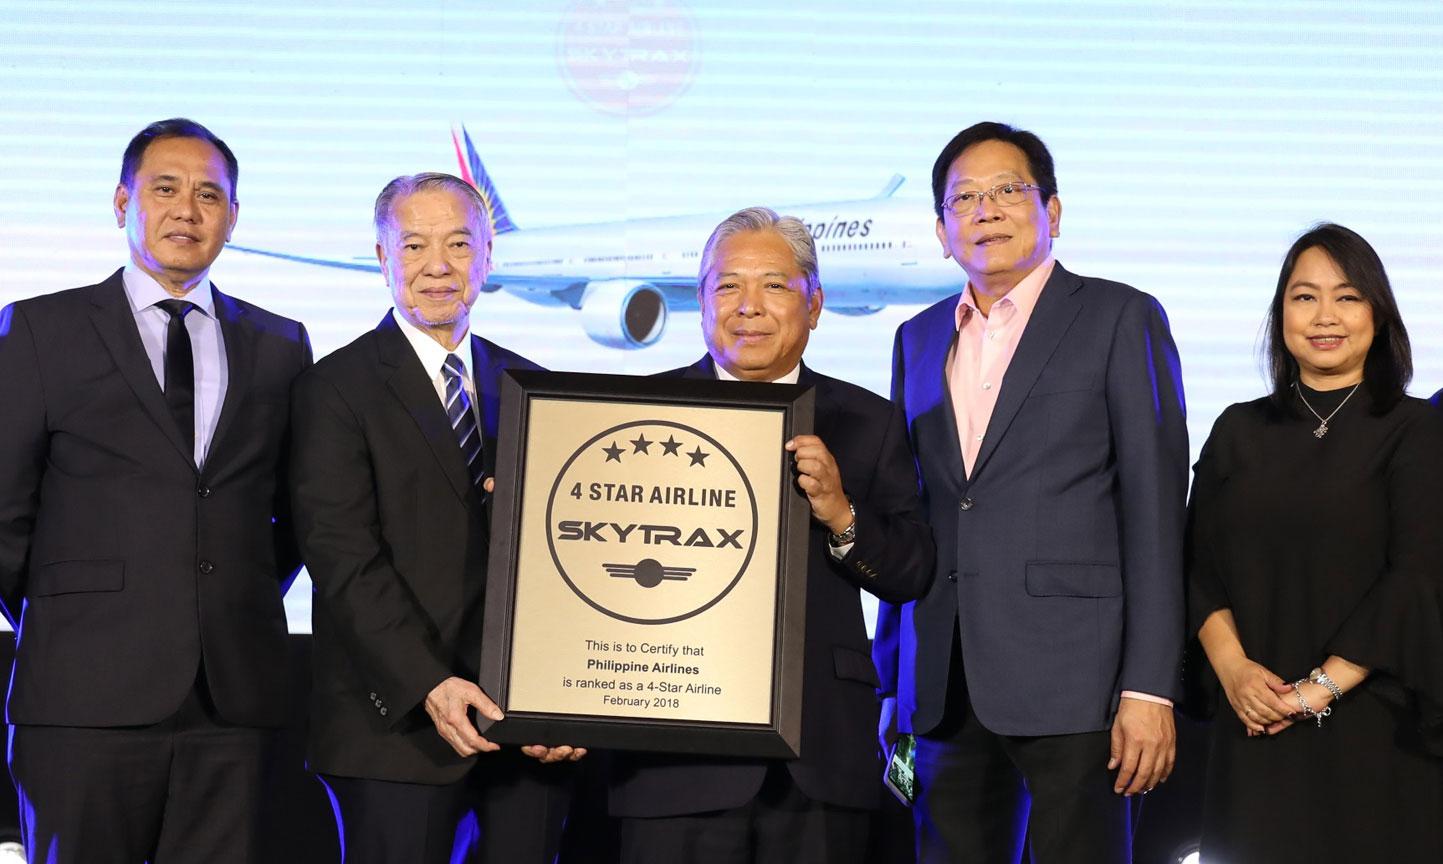 Philippine Airlines (PAL) today (Feb. 13, 2018) presented to media the 4-Star Certification plaque awarded by Skytrax last Feb. 8 in Singapore and the detailed plans for 2018 in order to sustain the 4-Star rating. Photo shows PAL Chairman and Chief Executive Officer Dr. Lucio C. Tan (2nd from left) and PAL President and Chief Operating Officer Jaime J. Bautista (3rd from right) holding the plaque, flanked by (from left) PAL Express President Bonifacio U. Sam, PAL Executive Vice President Stewart C. Lim and PAL Chief Customer Experience Officer Jessica Abaya.